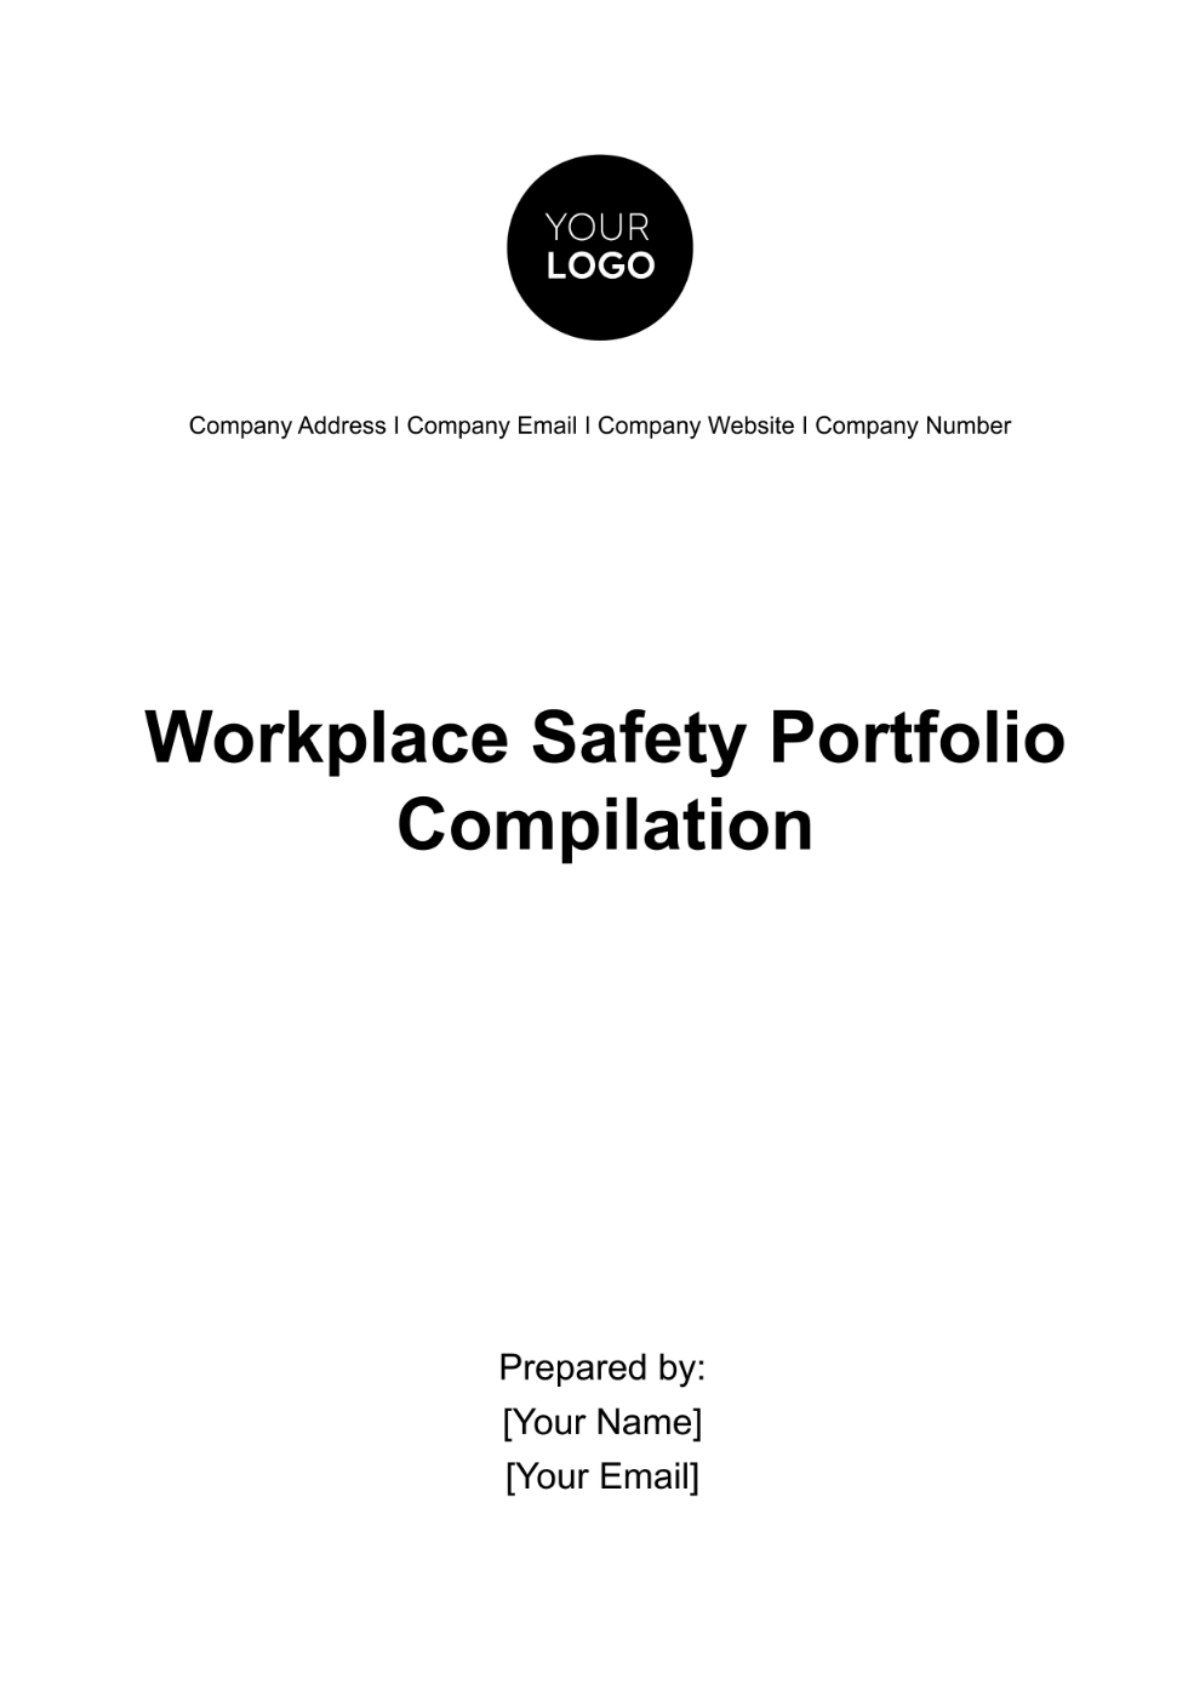 Free Workplace Safety Portfolio Compilation Template